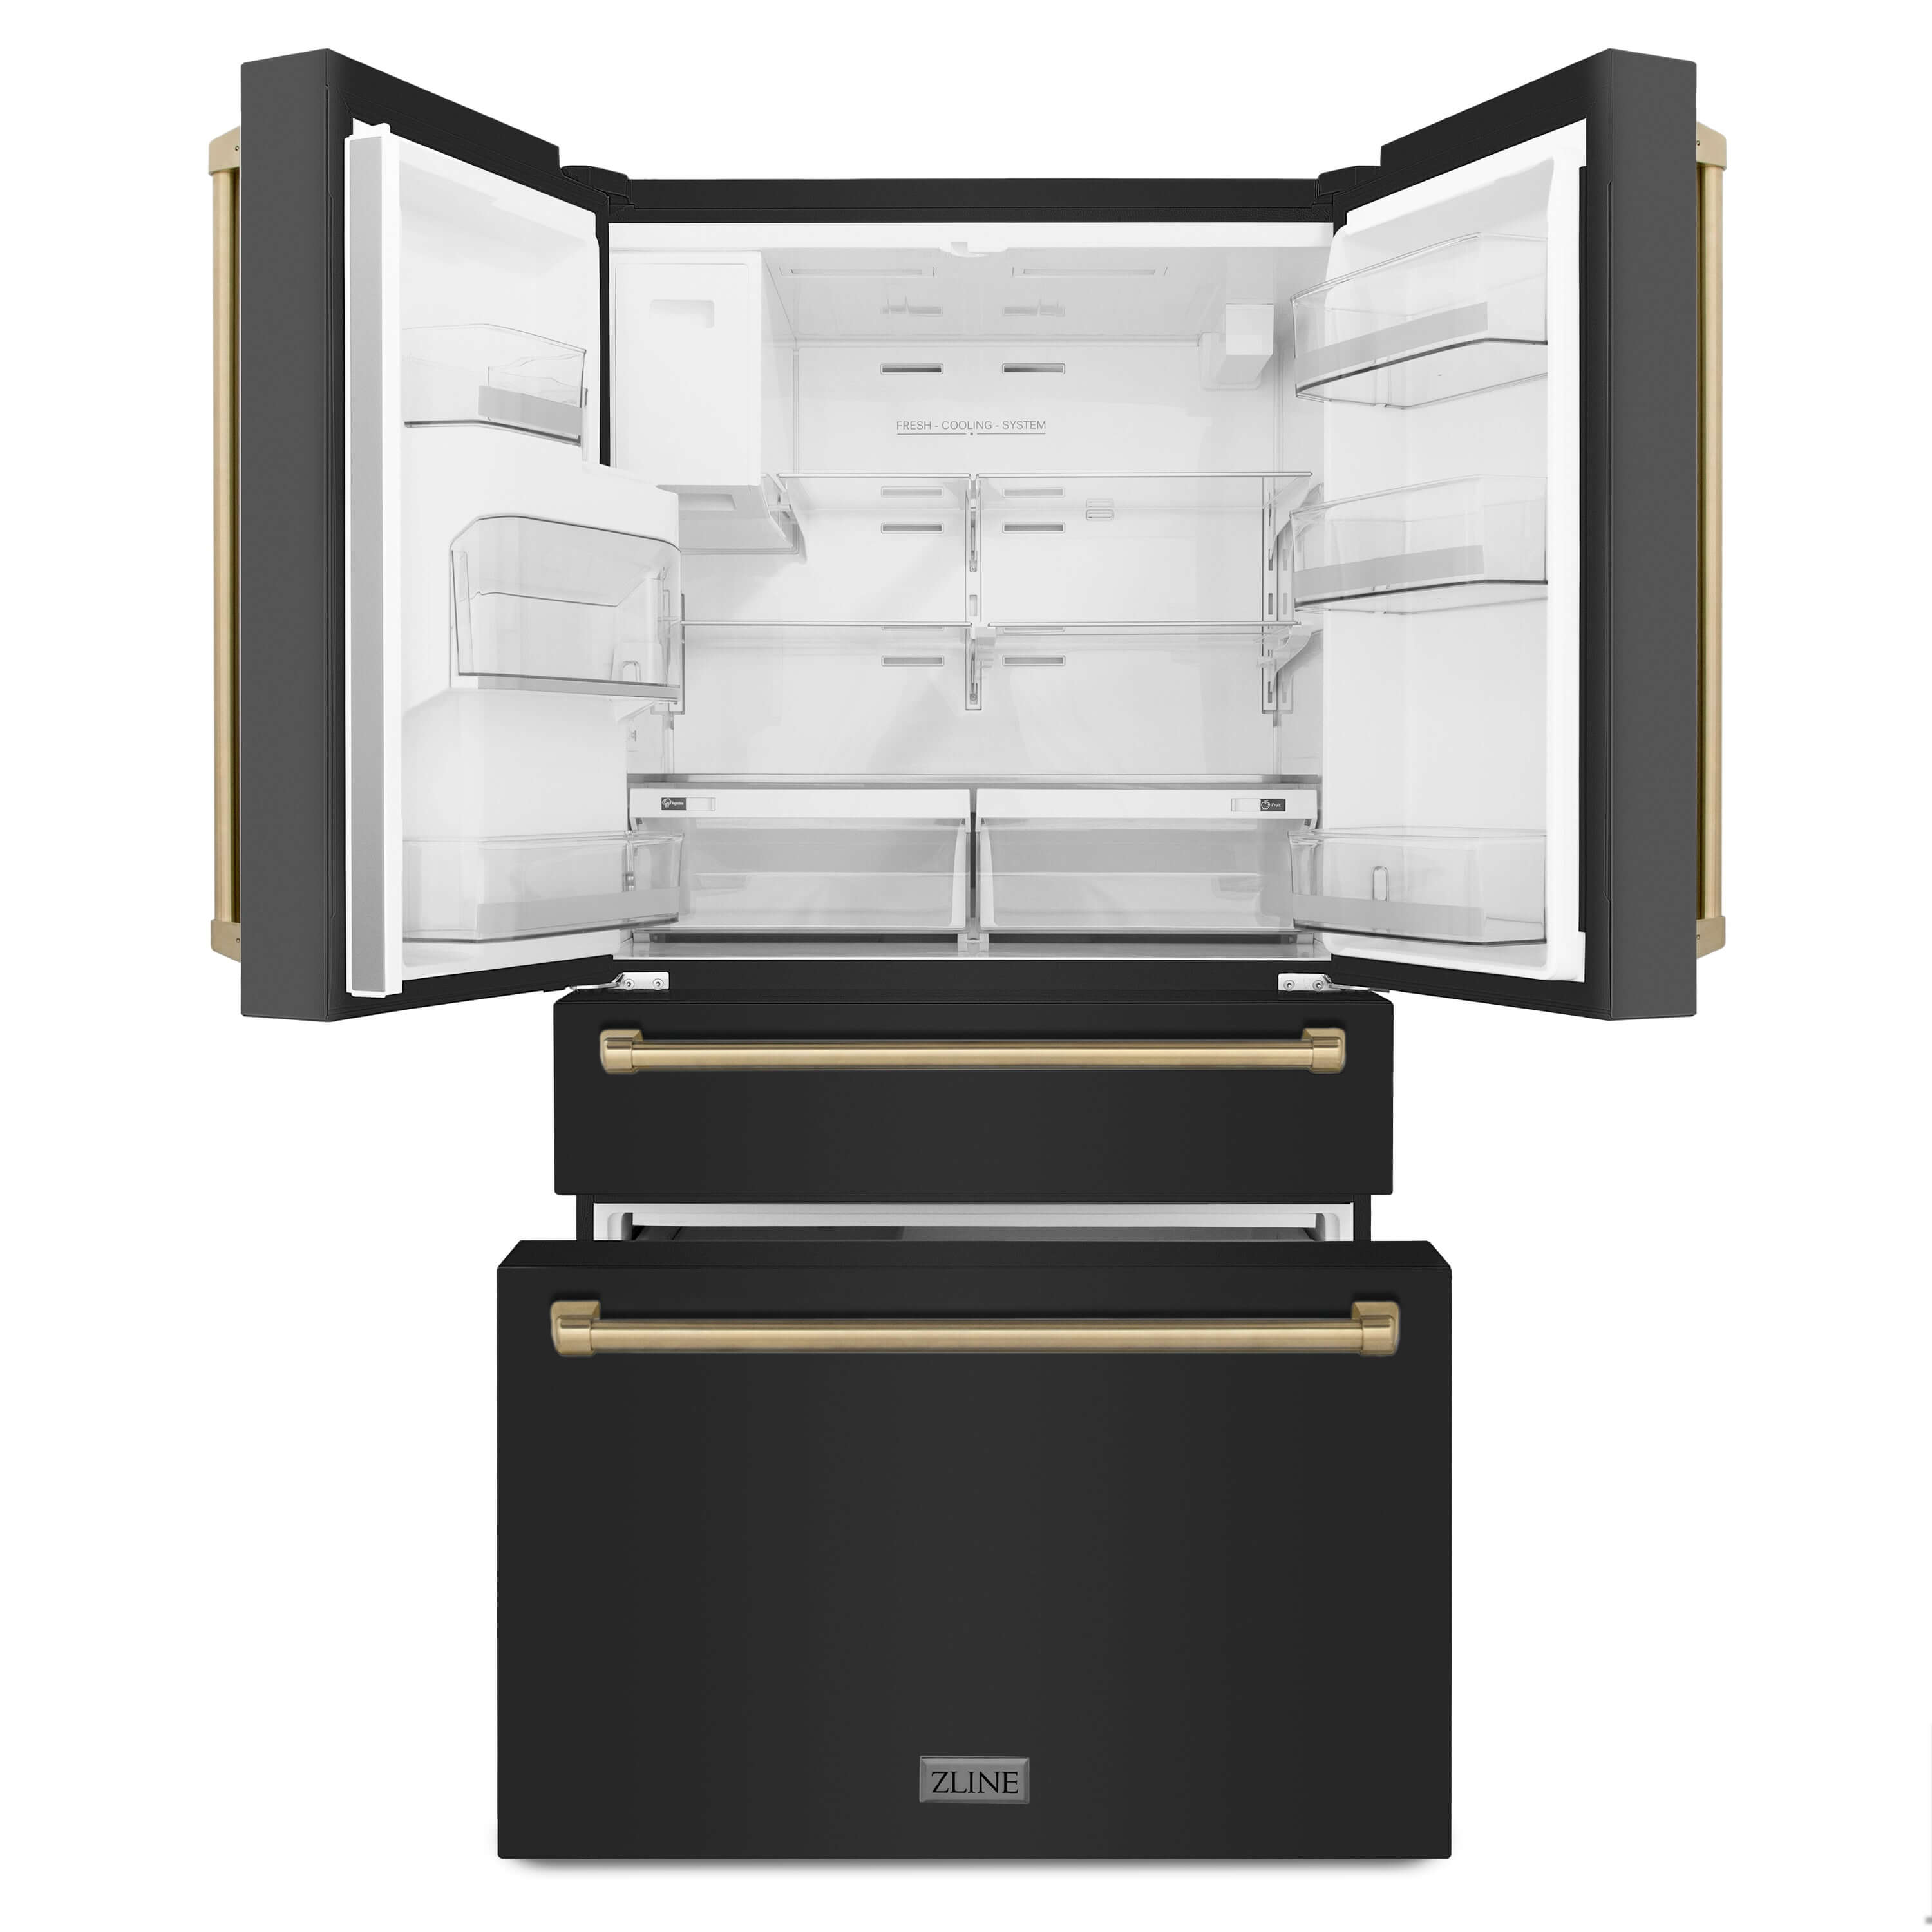 ZLINE Autograph Edition 36 in. 21.6 cu. ft Freestanding French Door Refrigerator with Water and Ice Dispenser in Fingerprint Resistant Black Stainless Steel with Champagne Bronze Accents (RFMZ-W-36-BS-CB) front, refrigeration compartment and bottom freezers open.